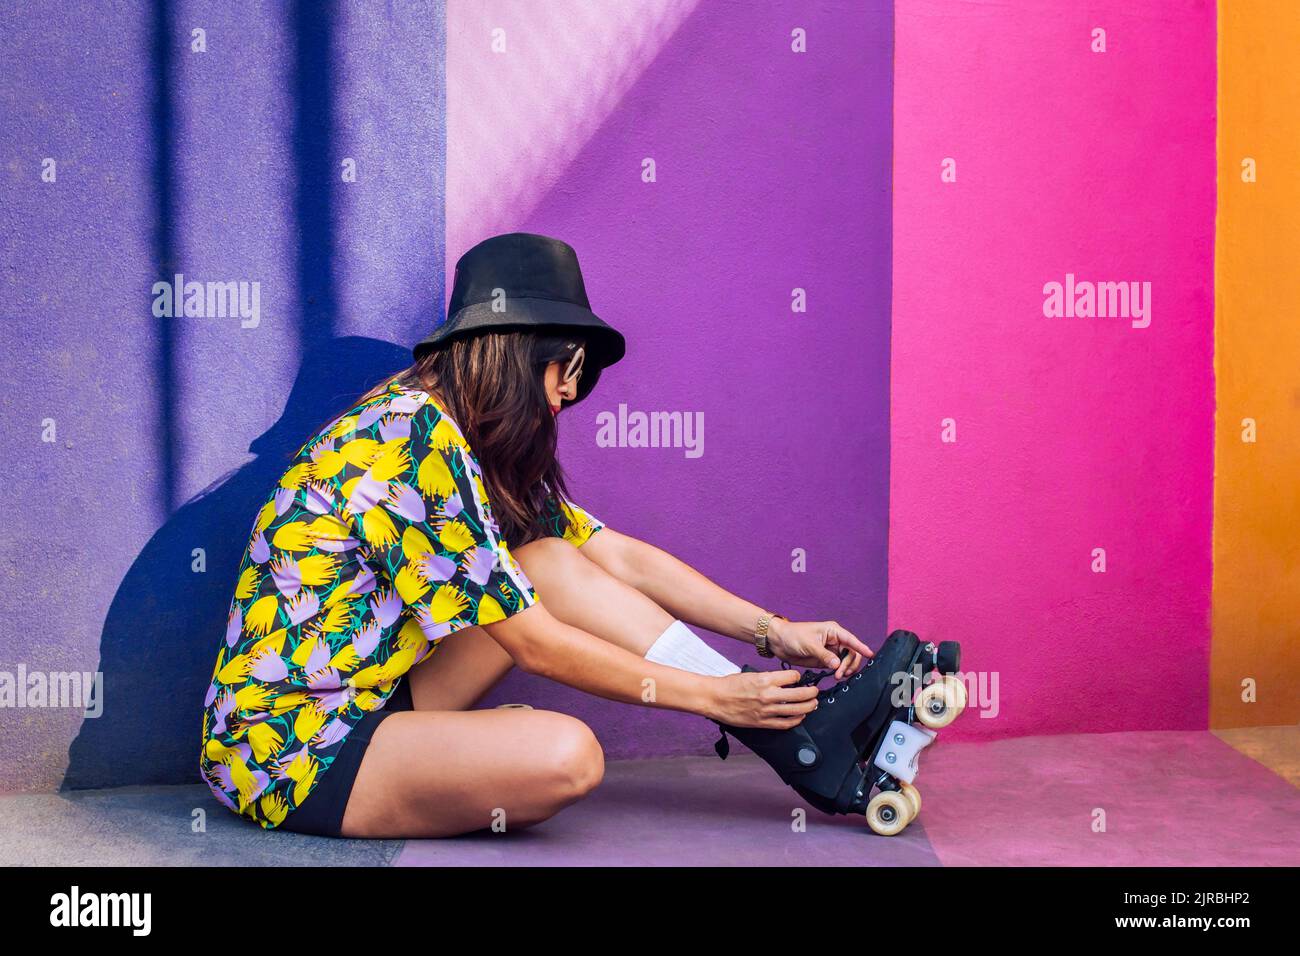 Woman wearing hat tying shoelace on roller skate by multi colored wall Stock Photo